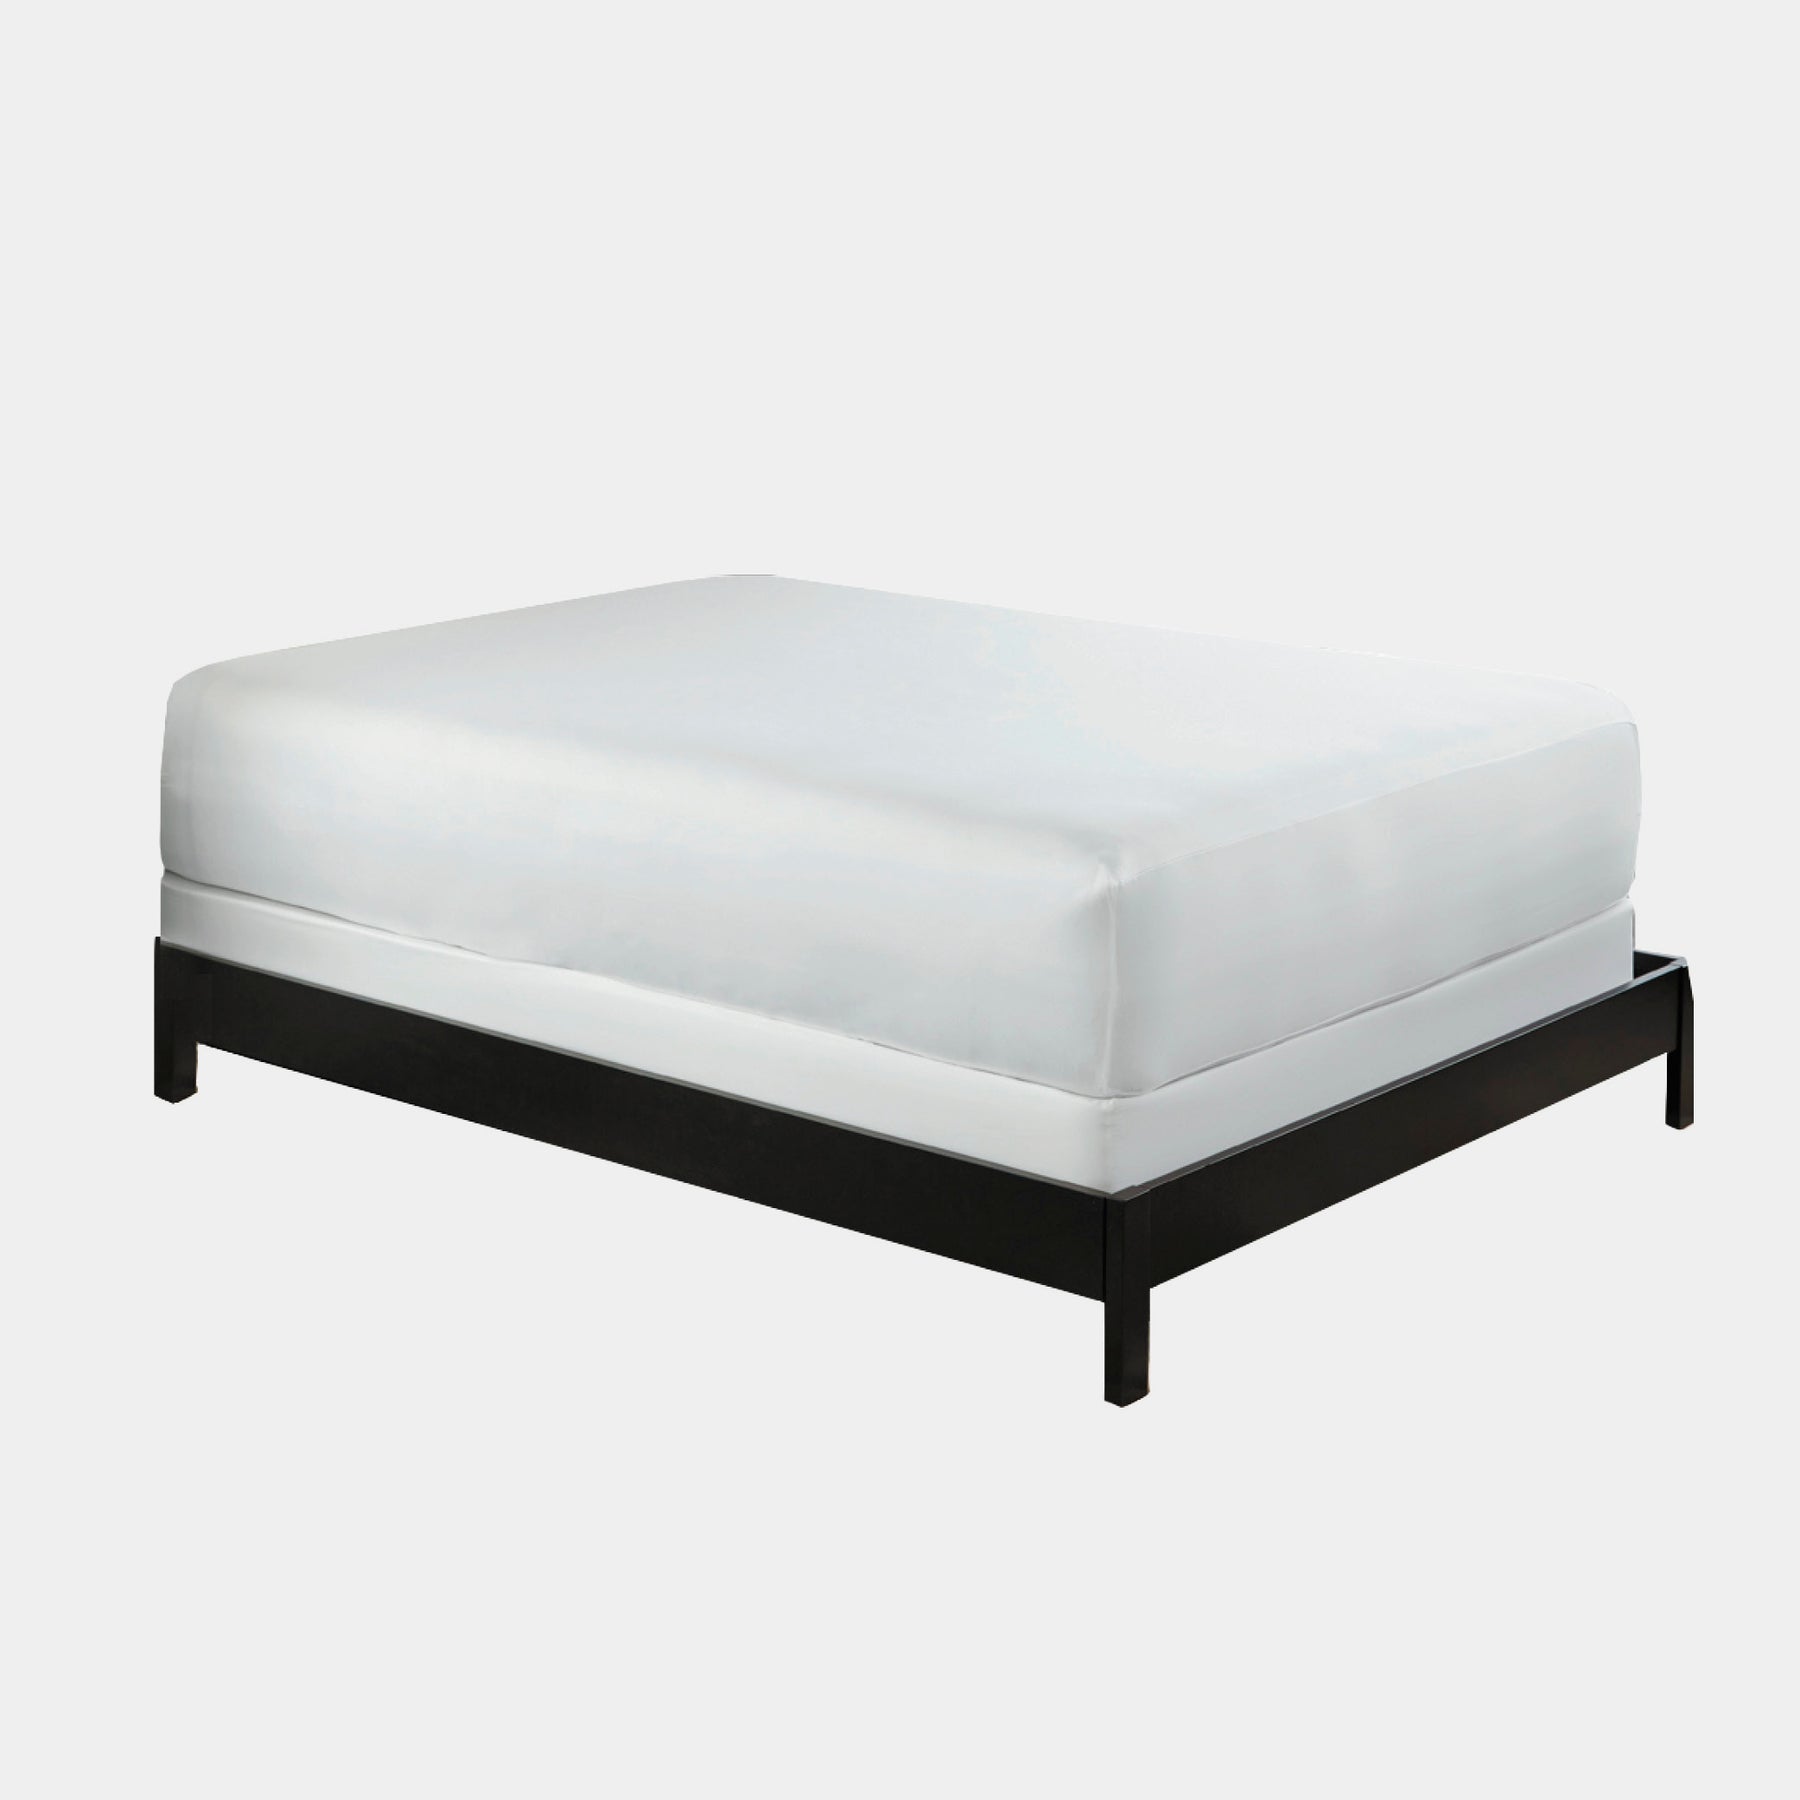 Image of a white Mattress Protector on a bed with a white background